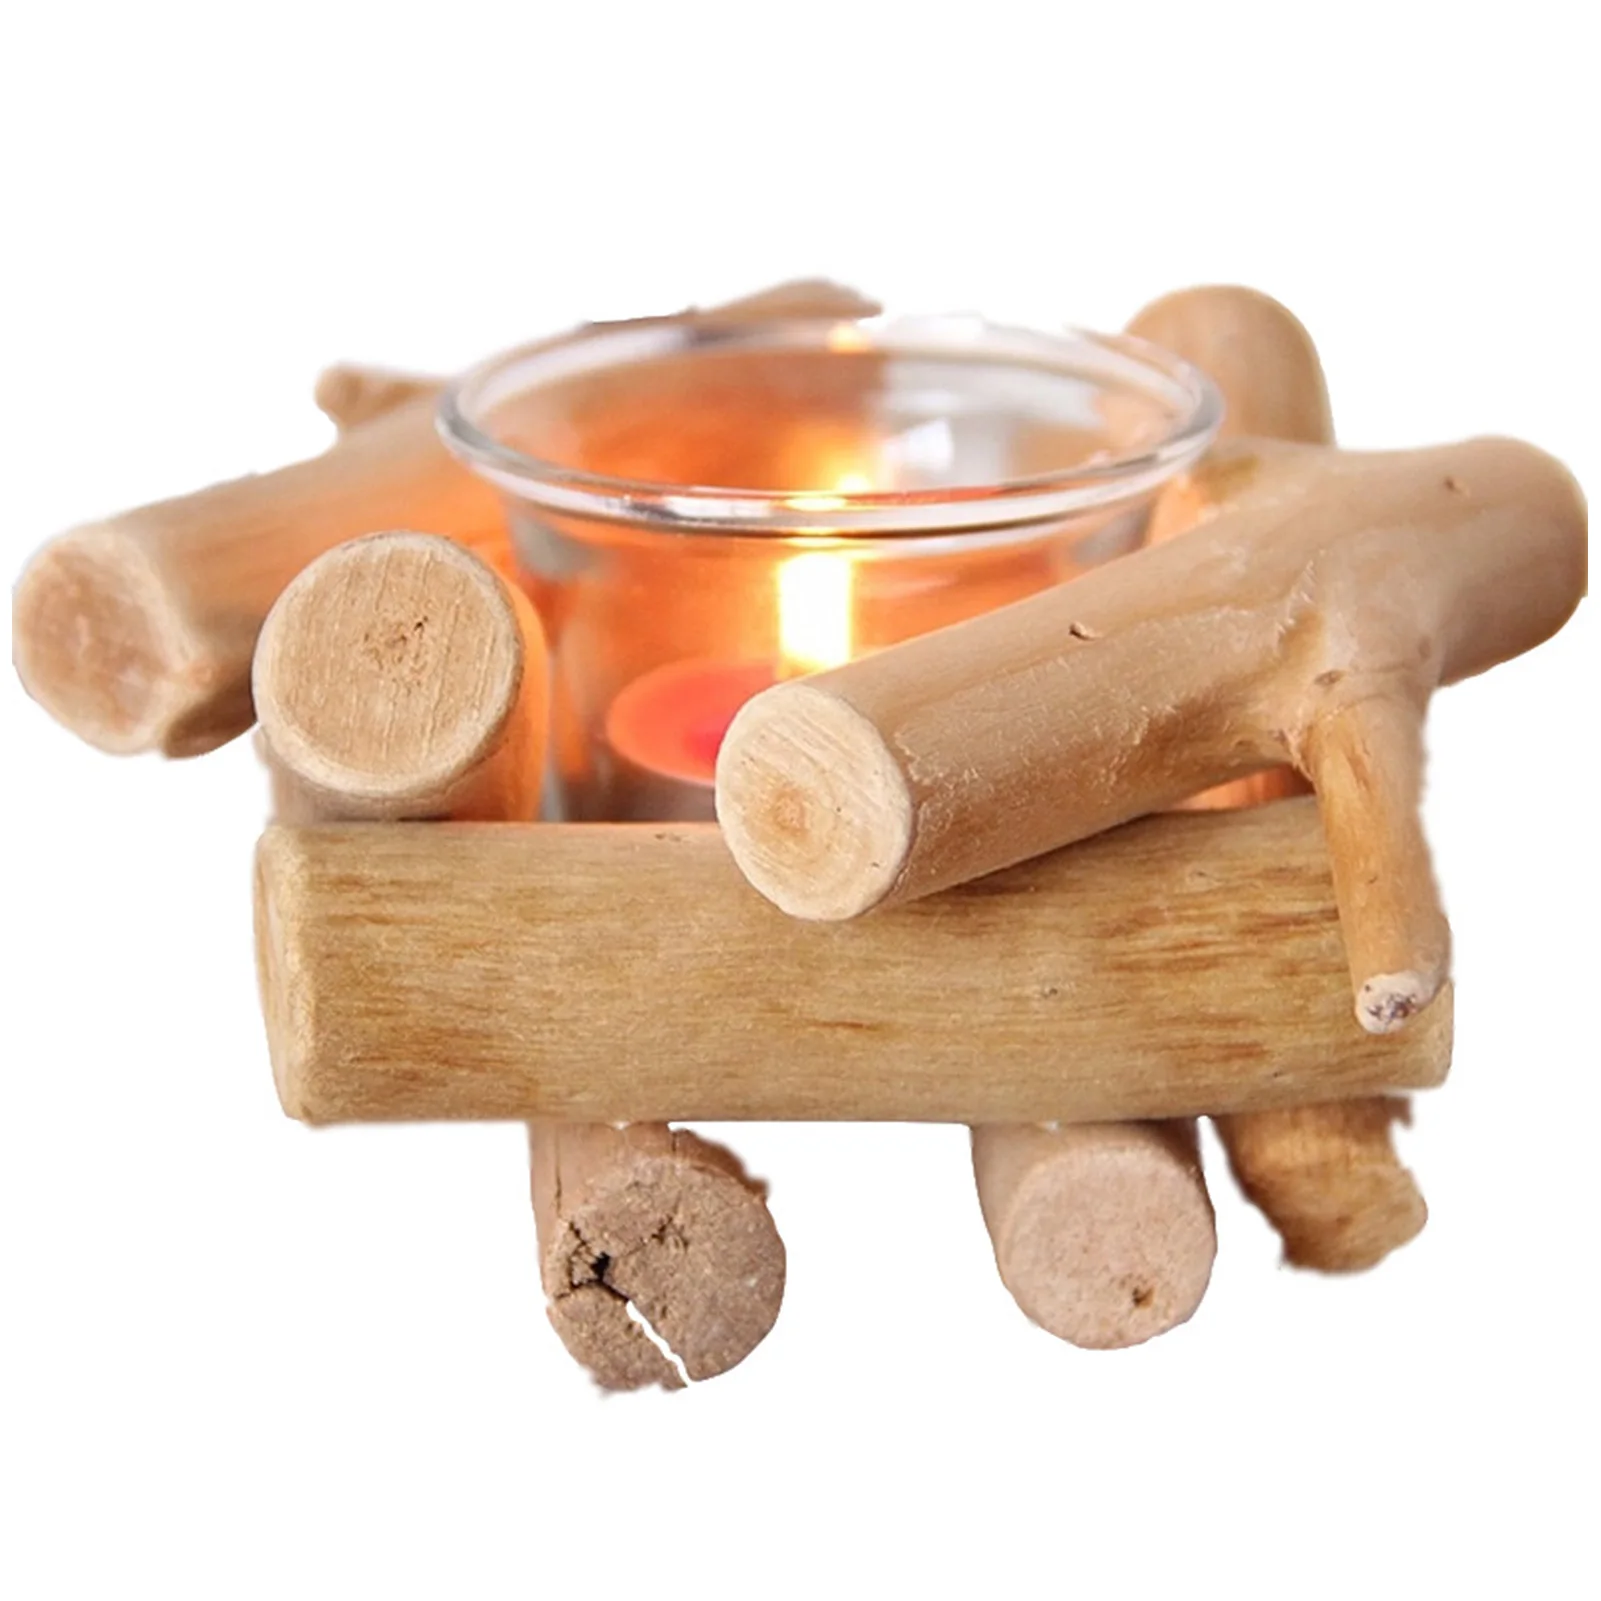 

1pc Natural Wooden Candle Holder Tealight Candlestick Festival Supply Christmas Wedding Candleholder Home Decor Ornament Gifts